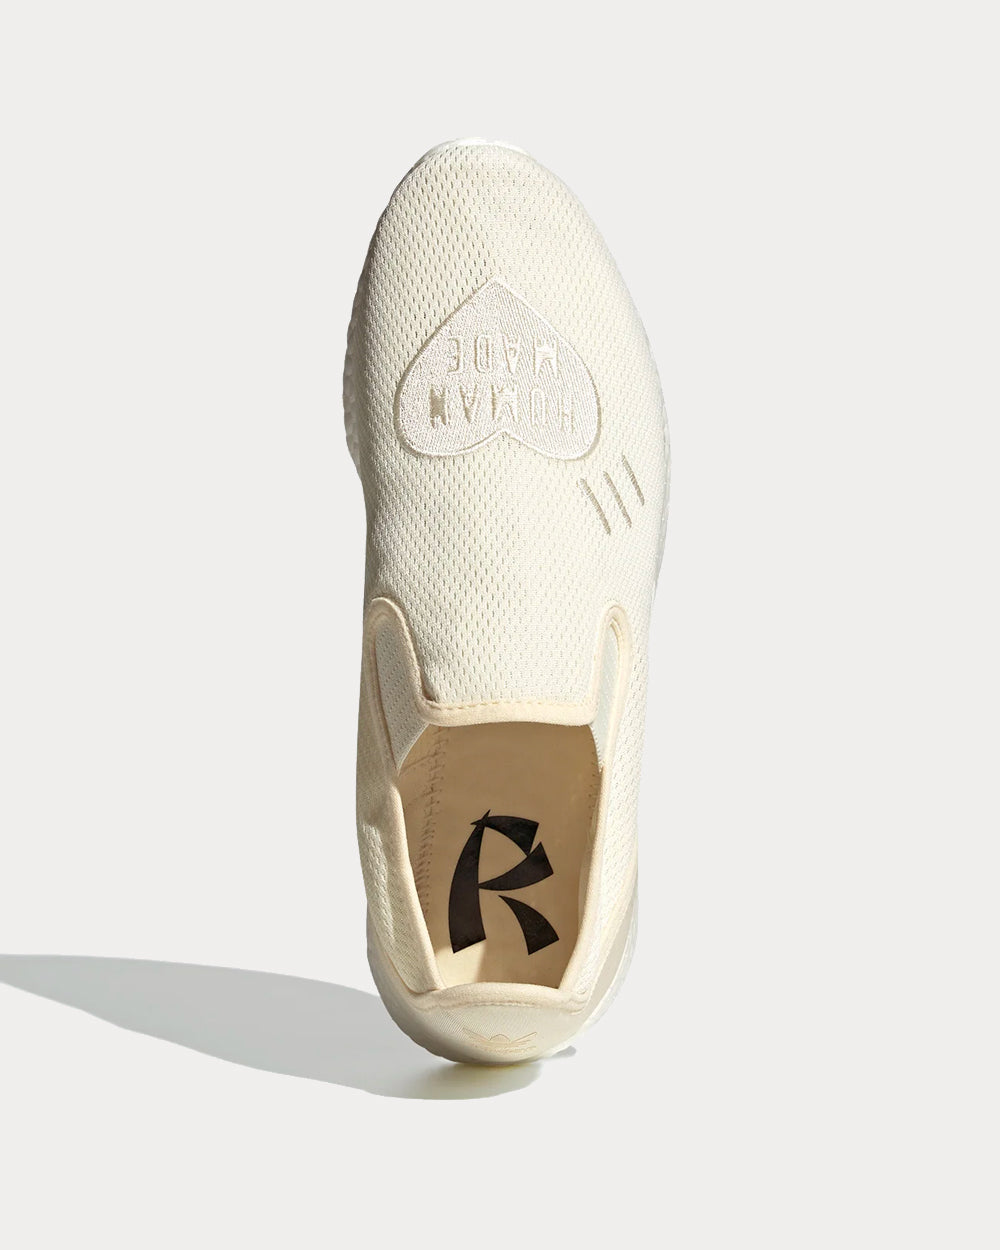 Adidas x Human Made Pure Cream White Slip On Sneakers - Sneak in Peace